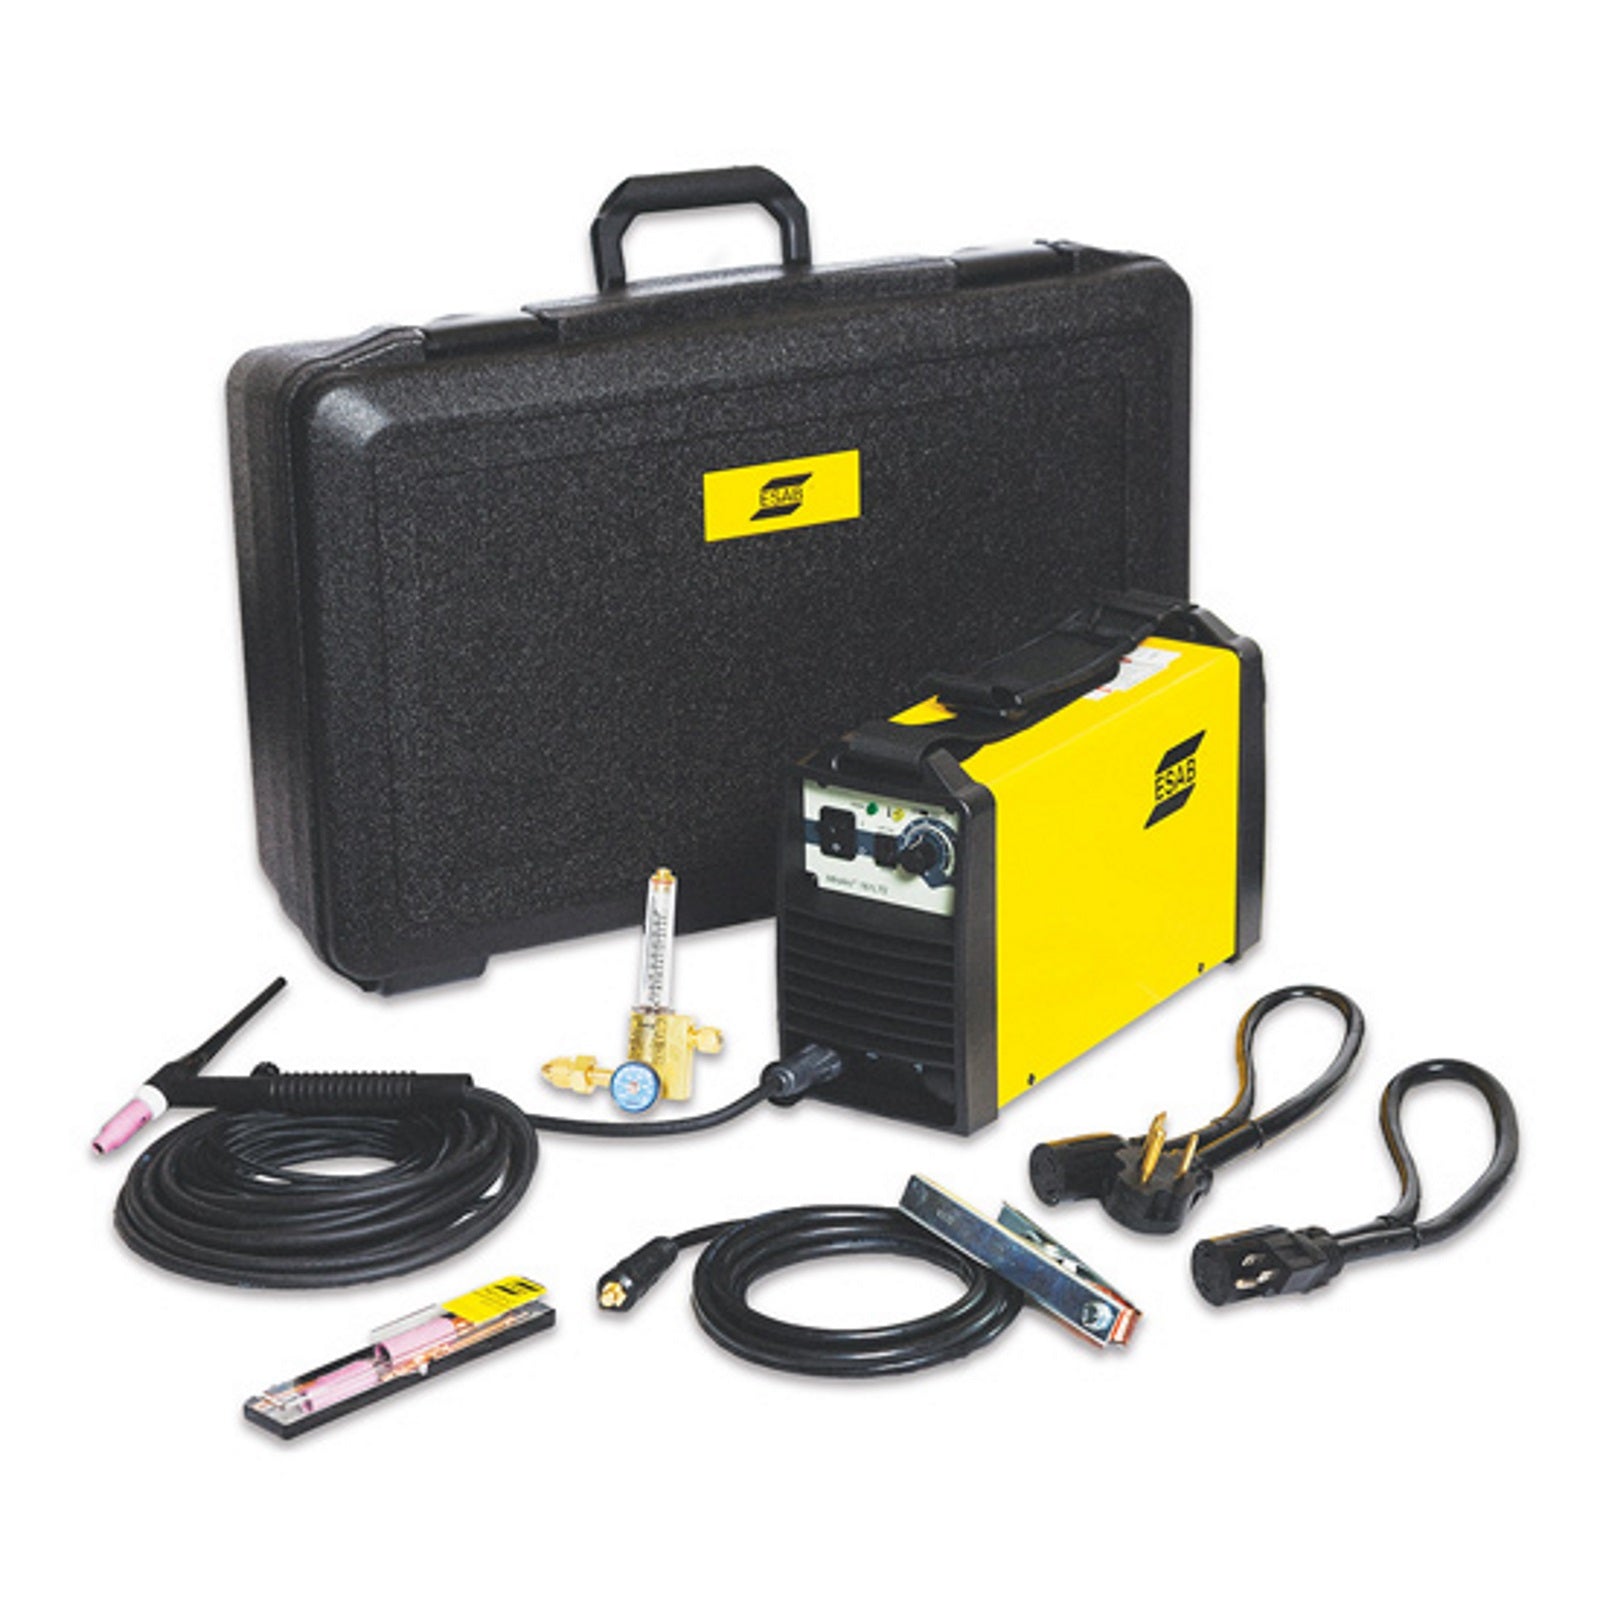 ESAB MiniArc 161LTS Stick and TIG Welder with Case (0558102202)